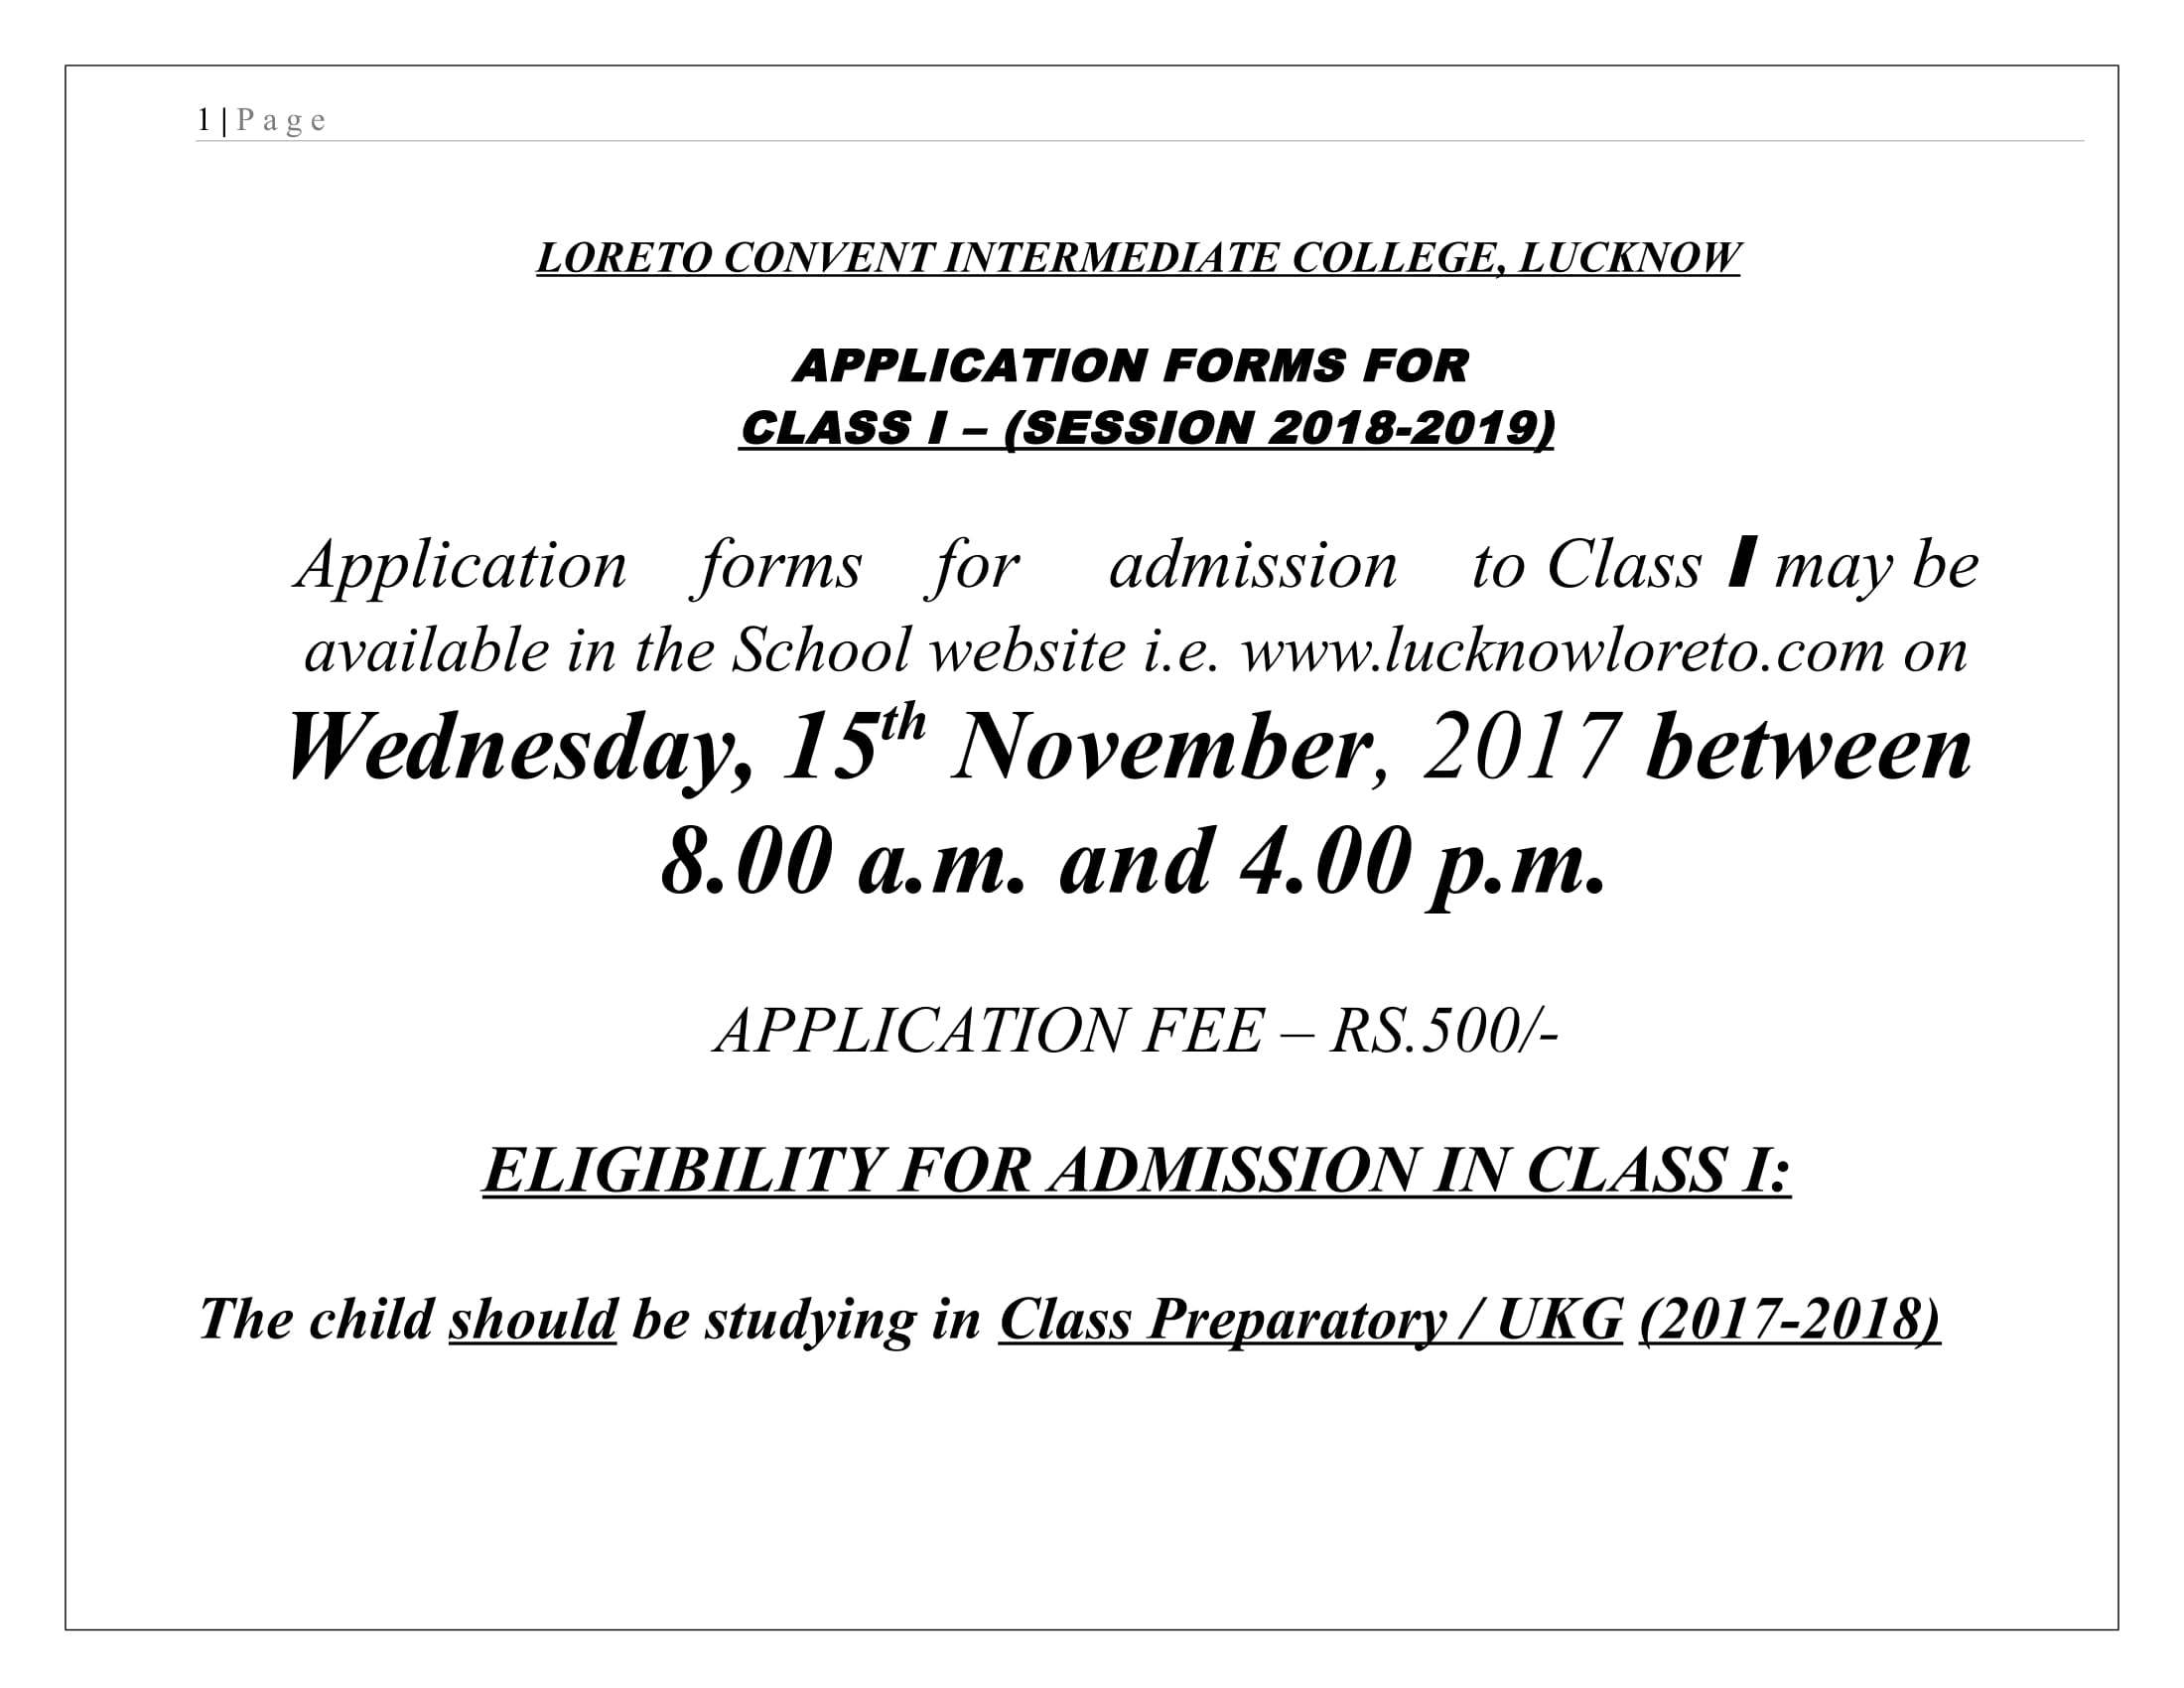 ONLINE ADMISSION NOTICE OF CLASS-I FOR SESSION 8-8 - Loreto